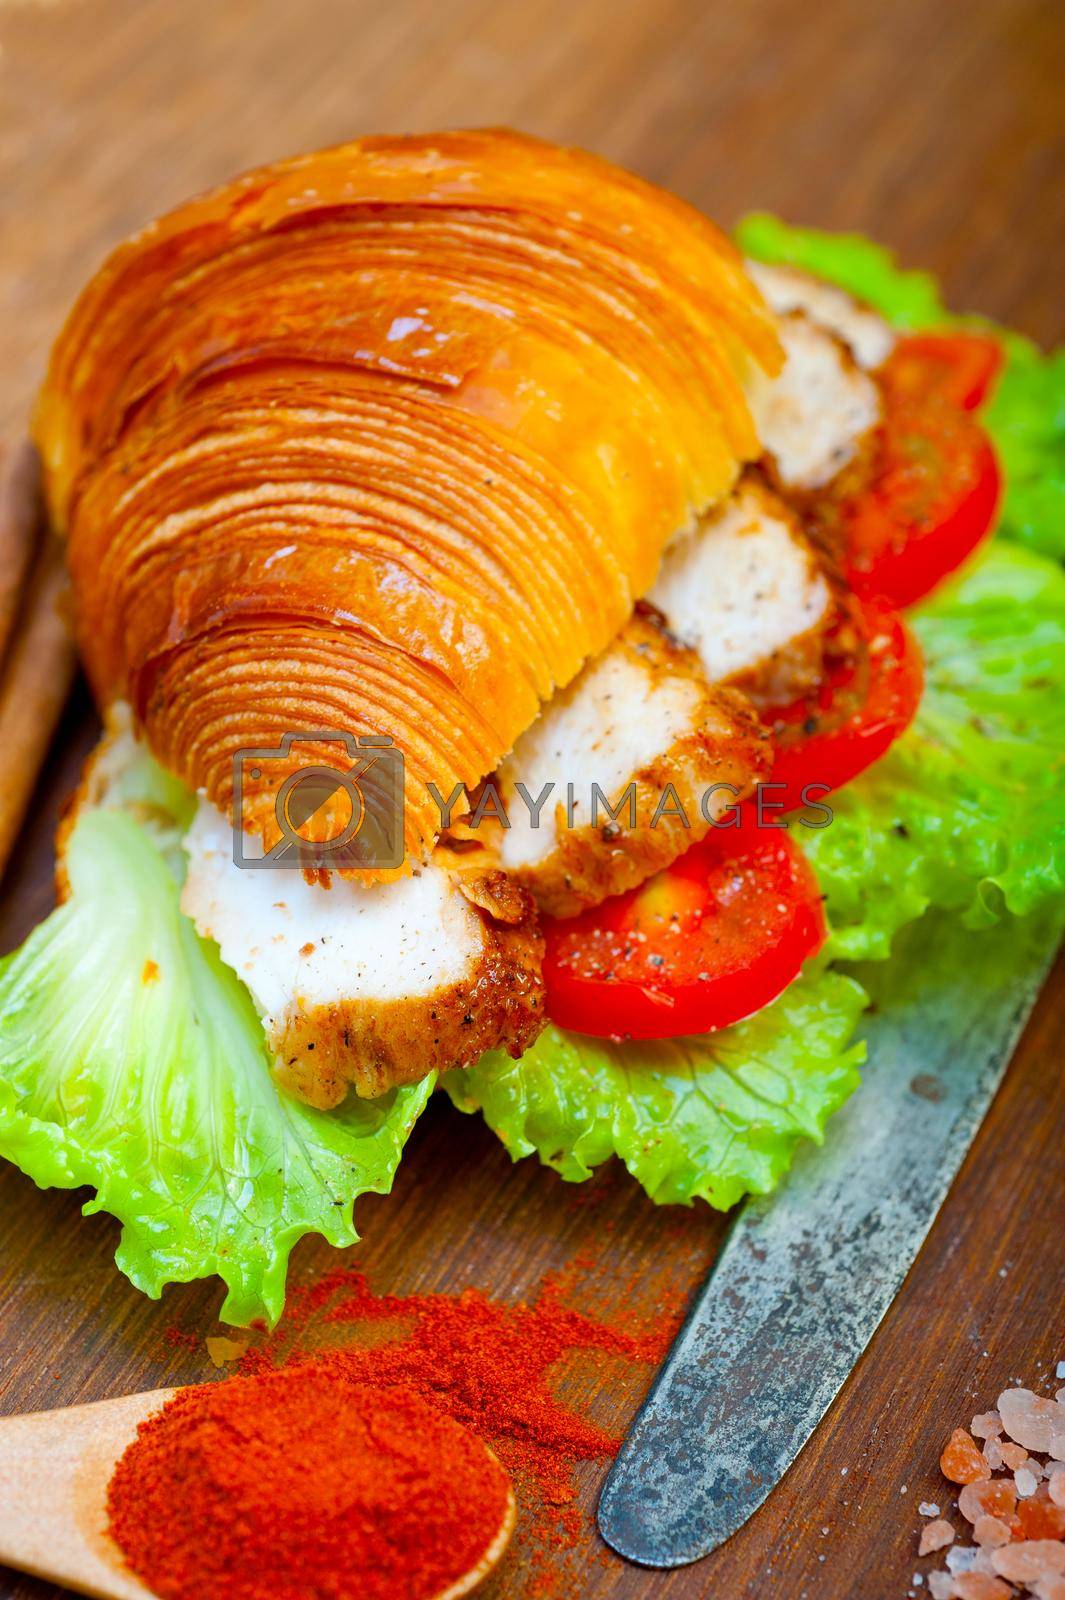 Royalty free image of savory croissant brioche bread with chicken breast  by keko64